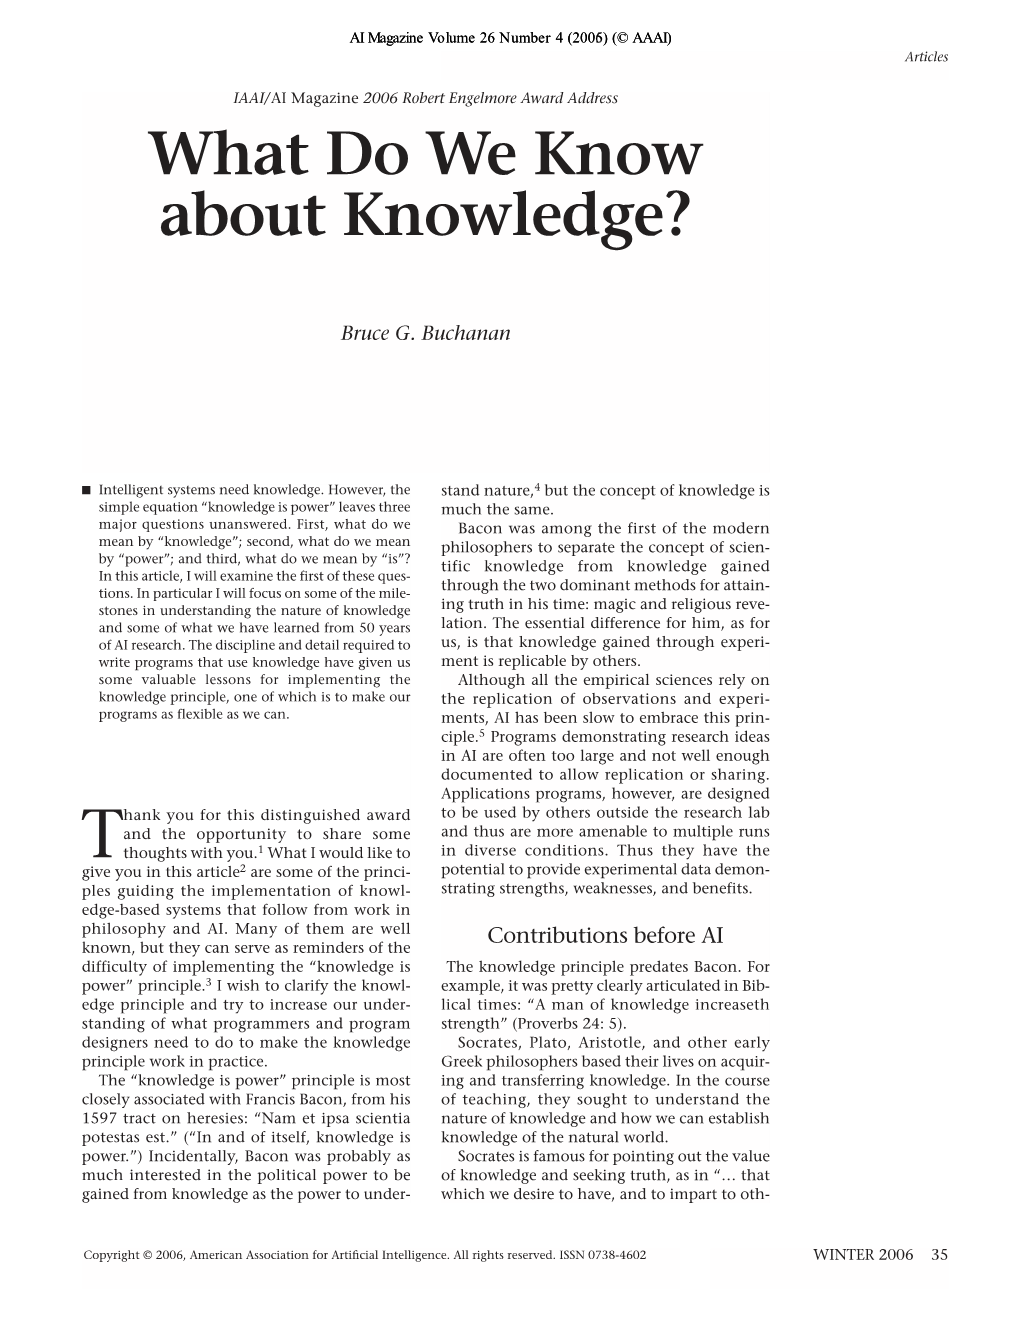 What Do We Know About Knowledge?